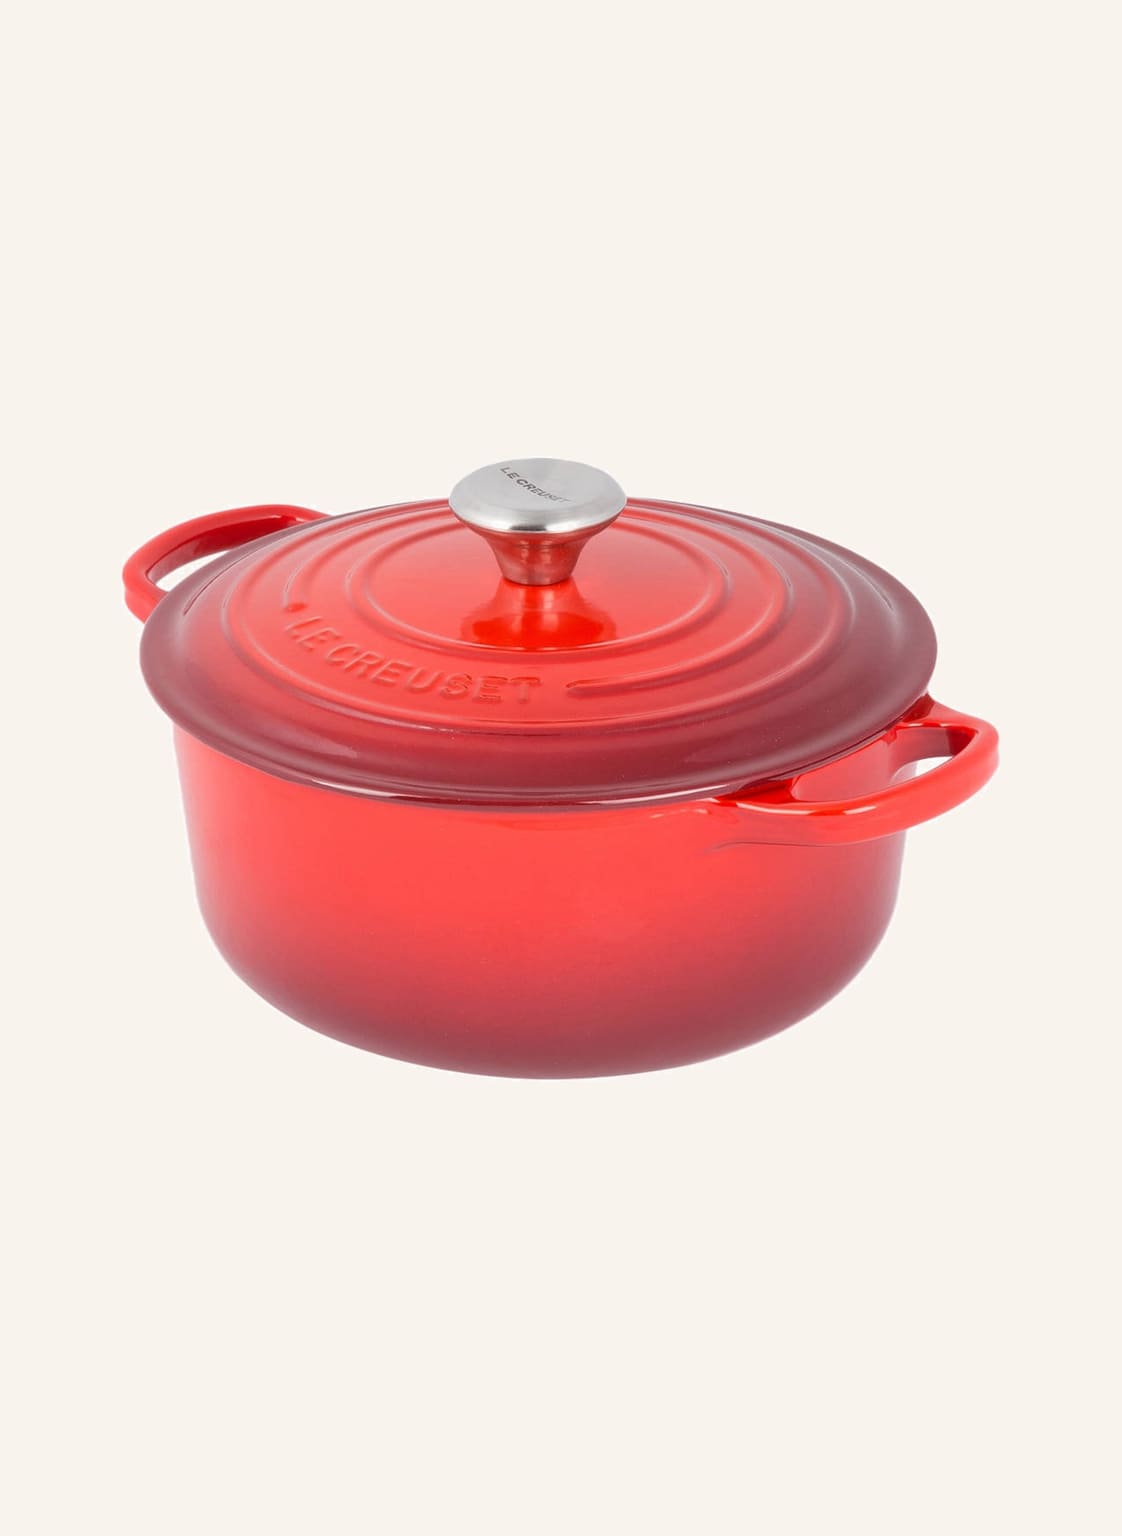 Image of Le Creuset Bräter Signature rot